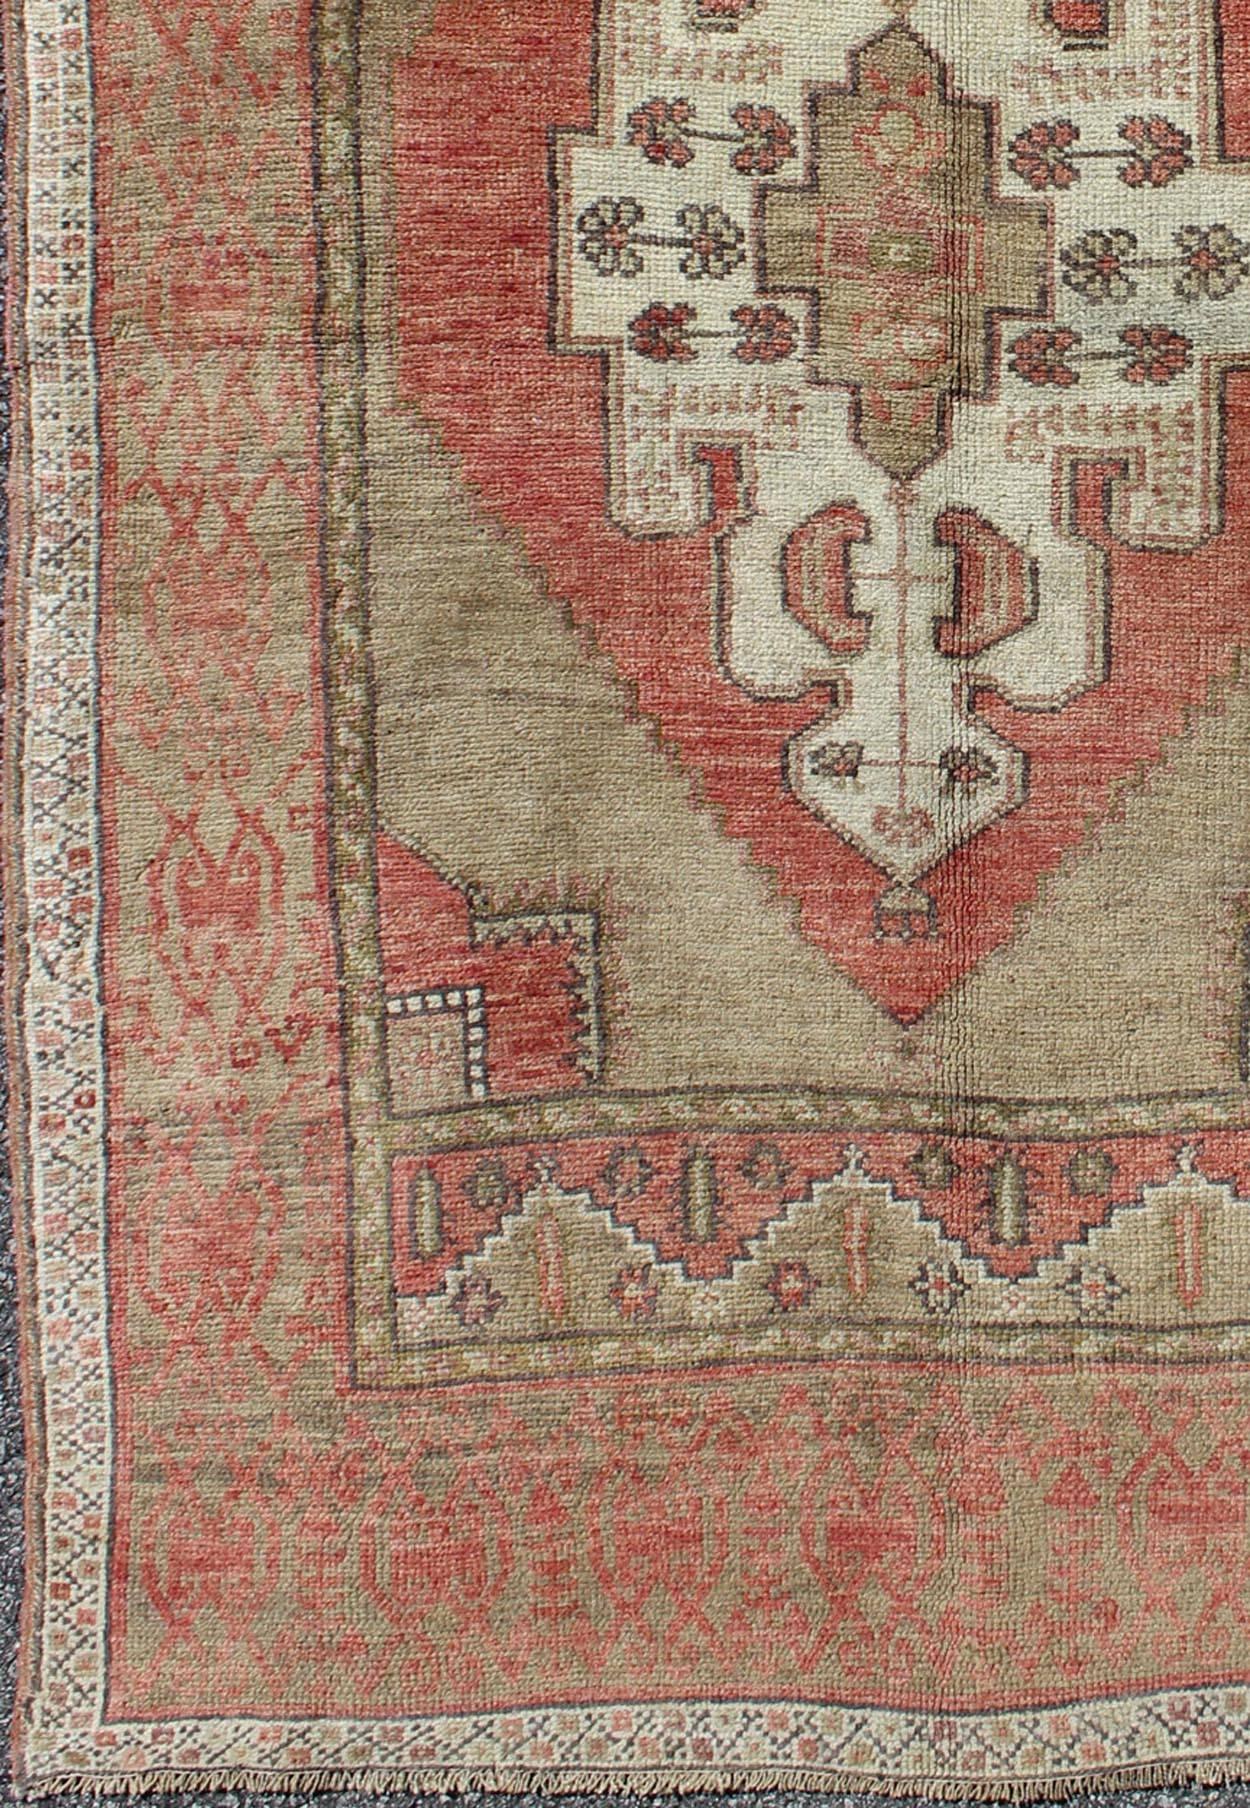 Olive green and red Oushak vintage Turkish rug with tribal medallion design, rug en-141924, country of origin / type: Turkey / Oushak, circa 1940

This vintage Turkish Oushak rug features an intricately beautiful design with a tribal aesthetic.